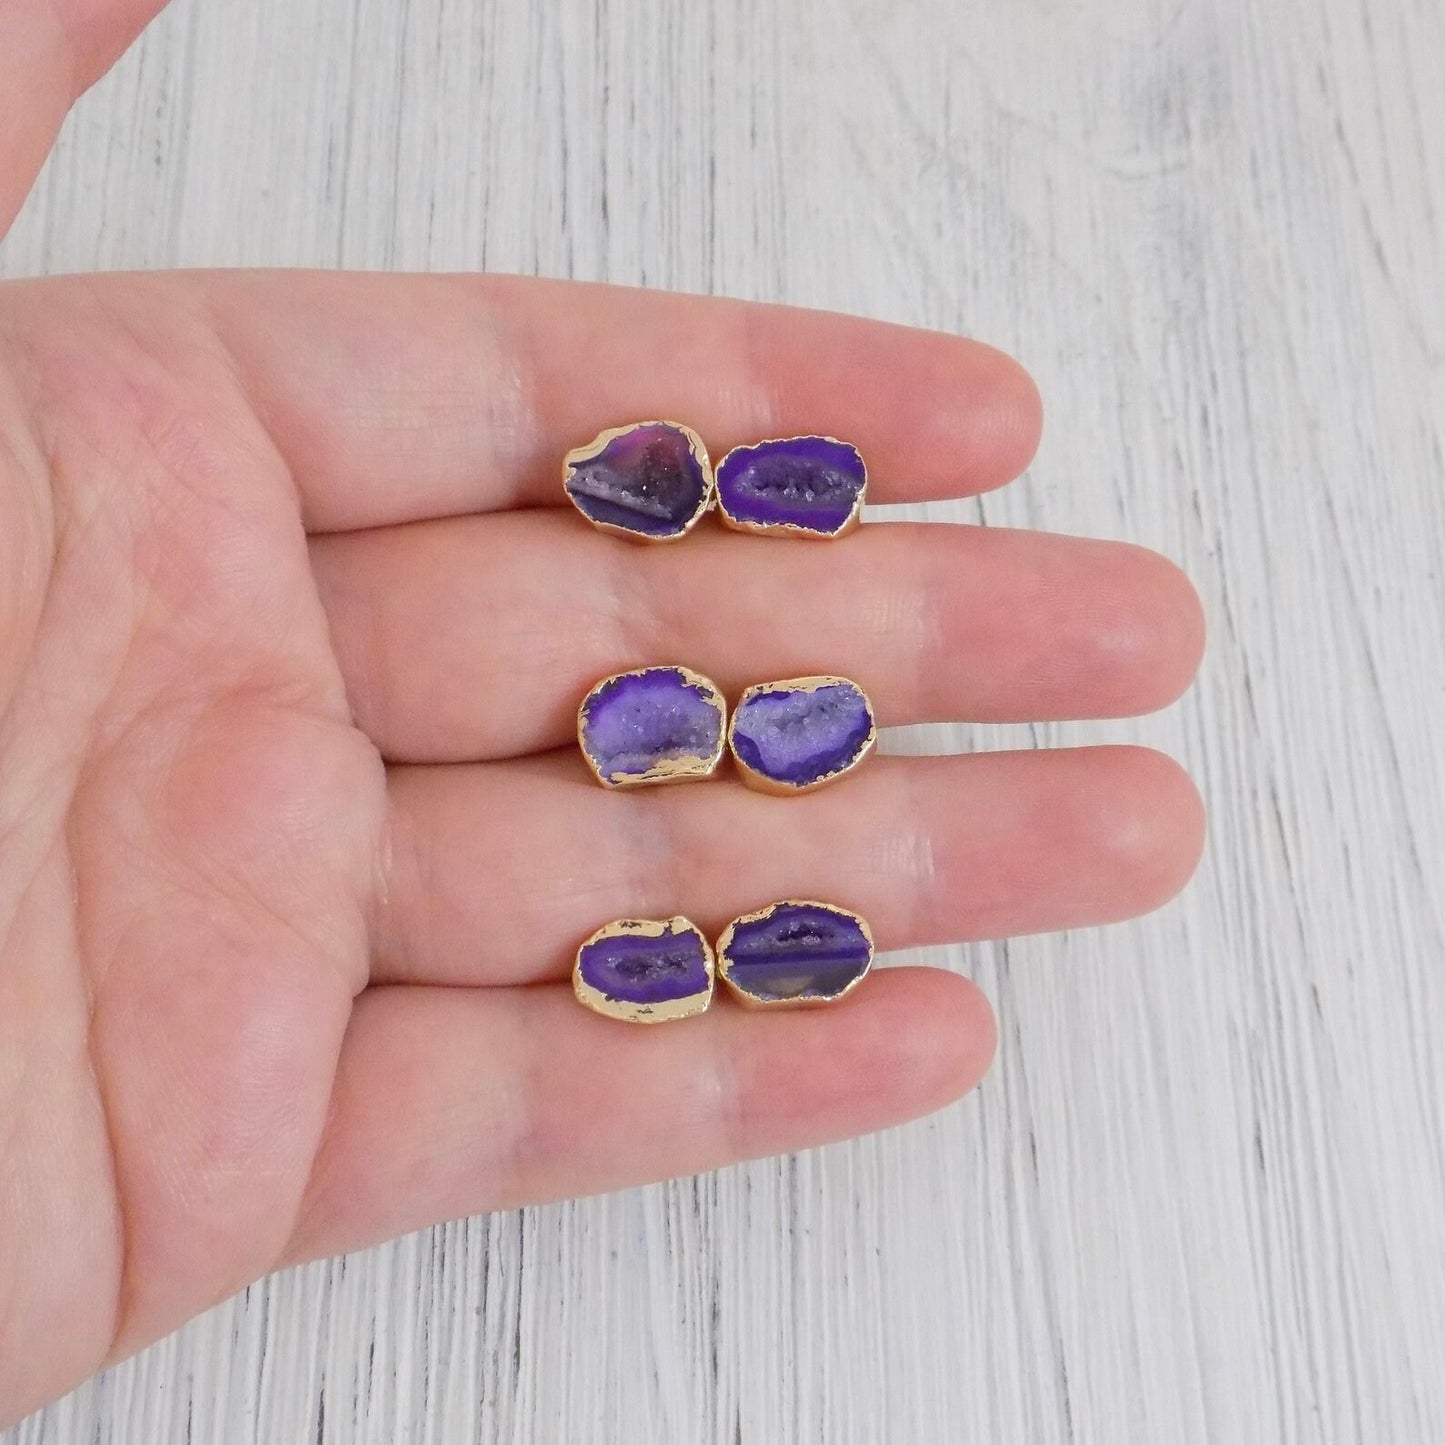 Christmas Gifts For Her - Purple Geode Earrings Studs Gold